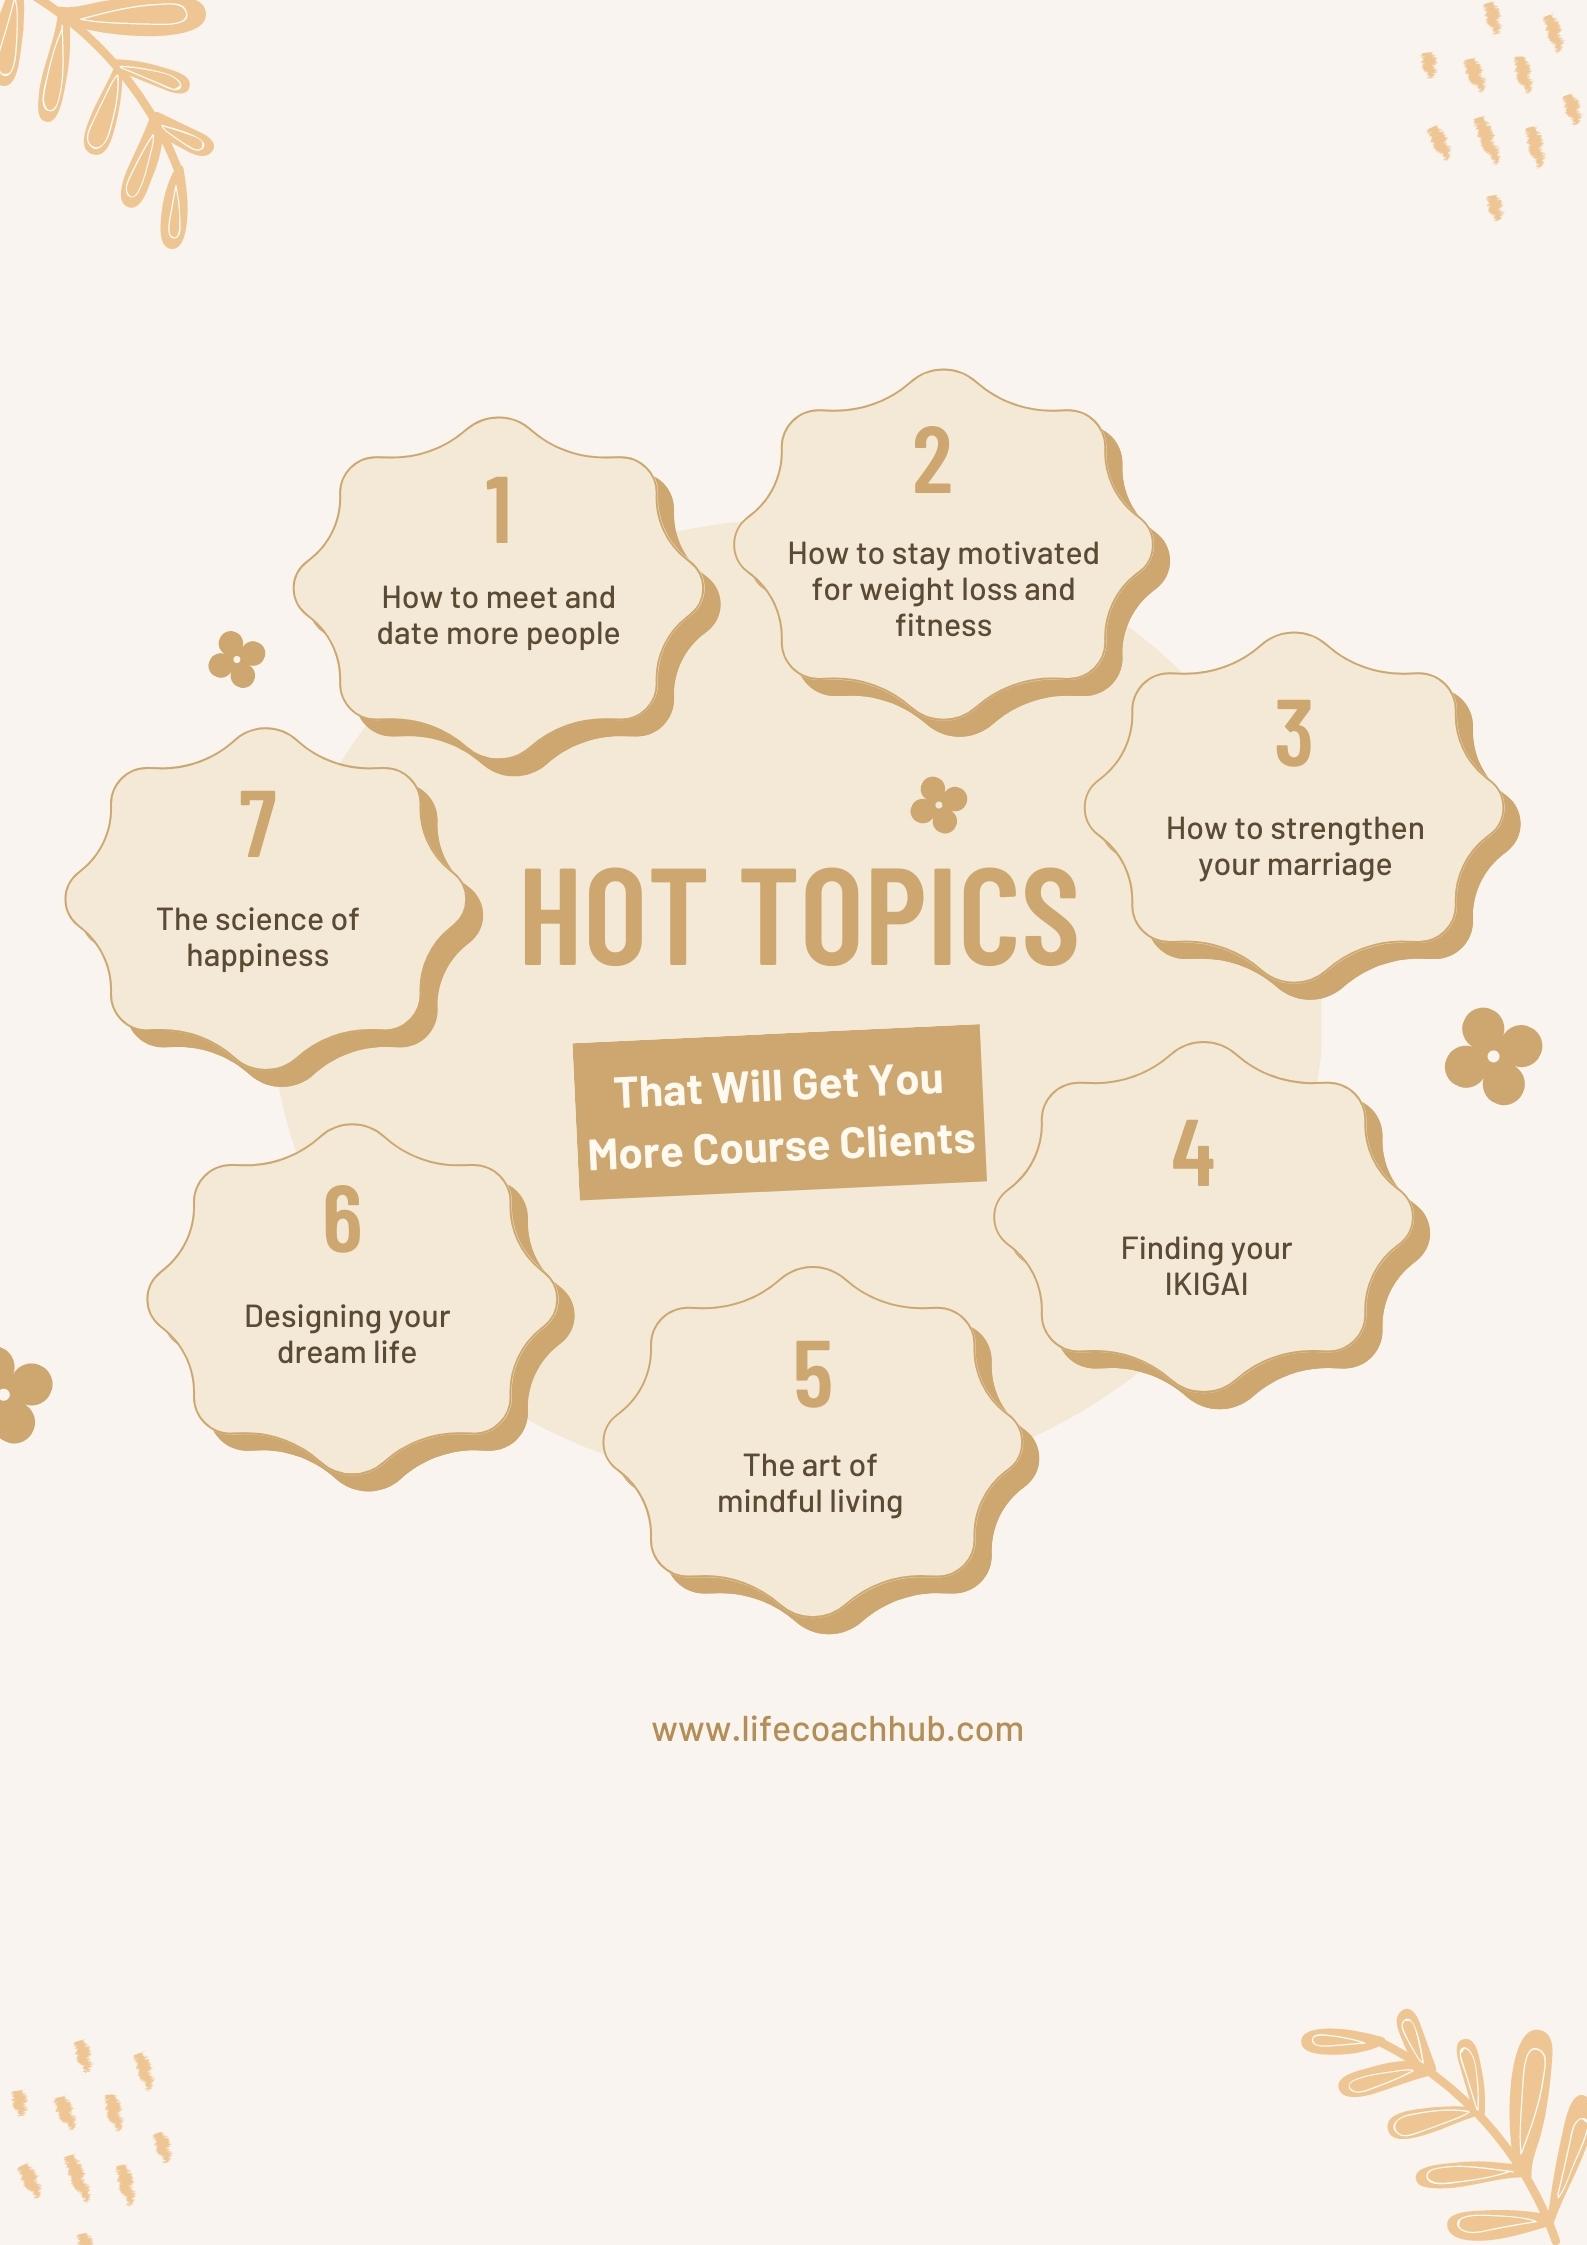 Hot Topics that will get you more course clients